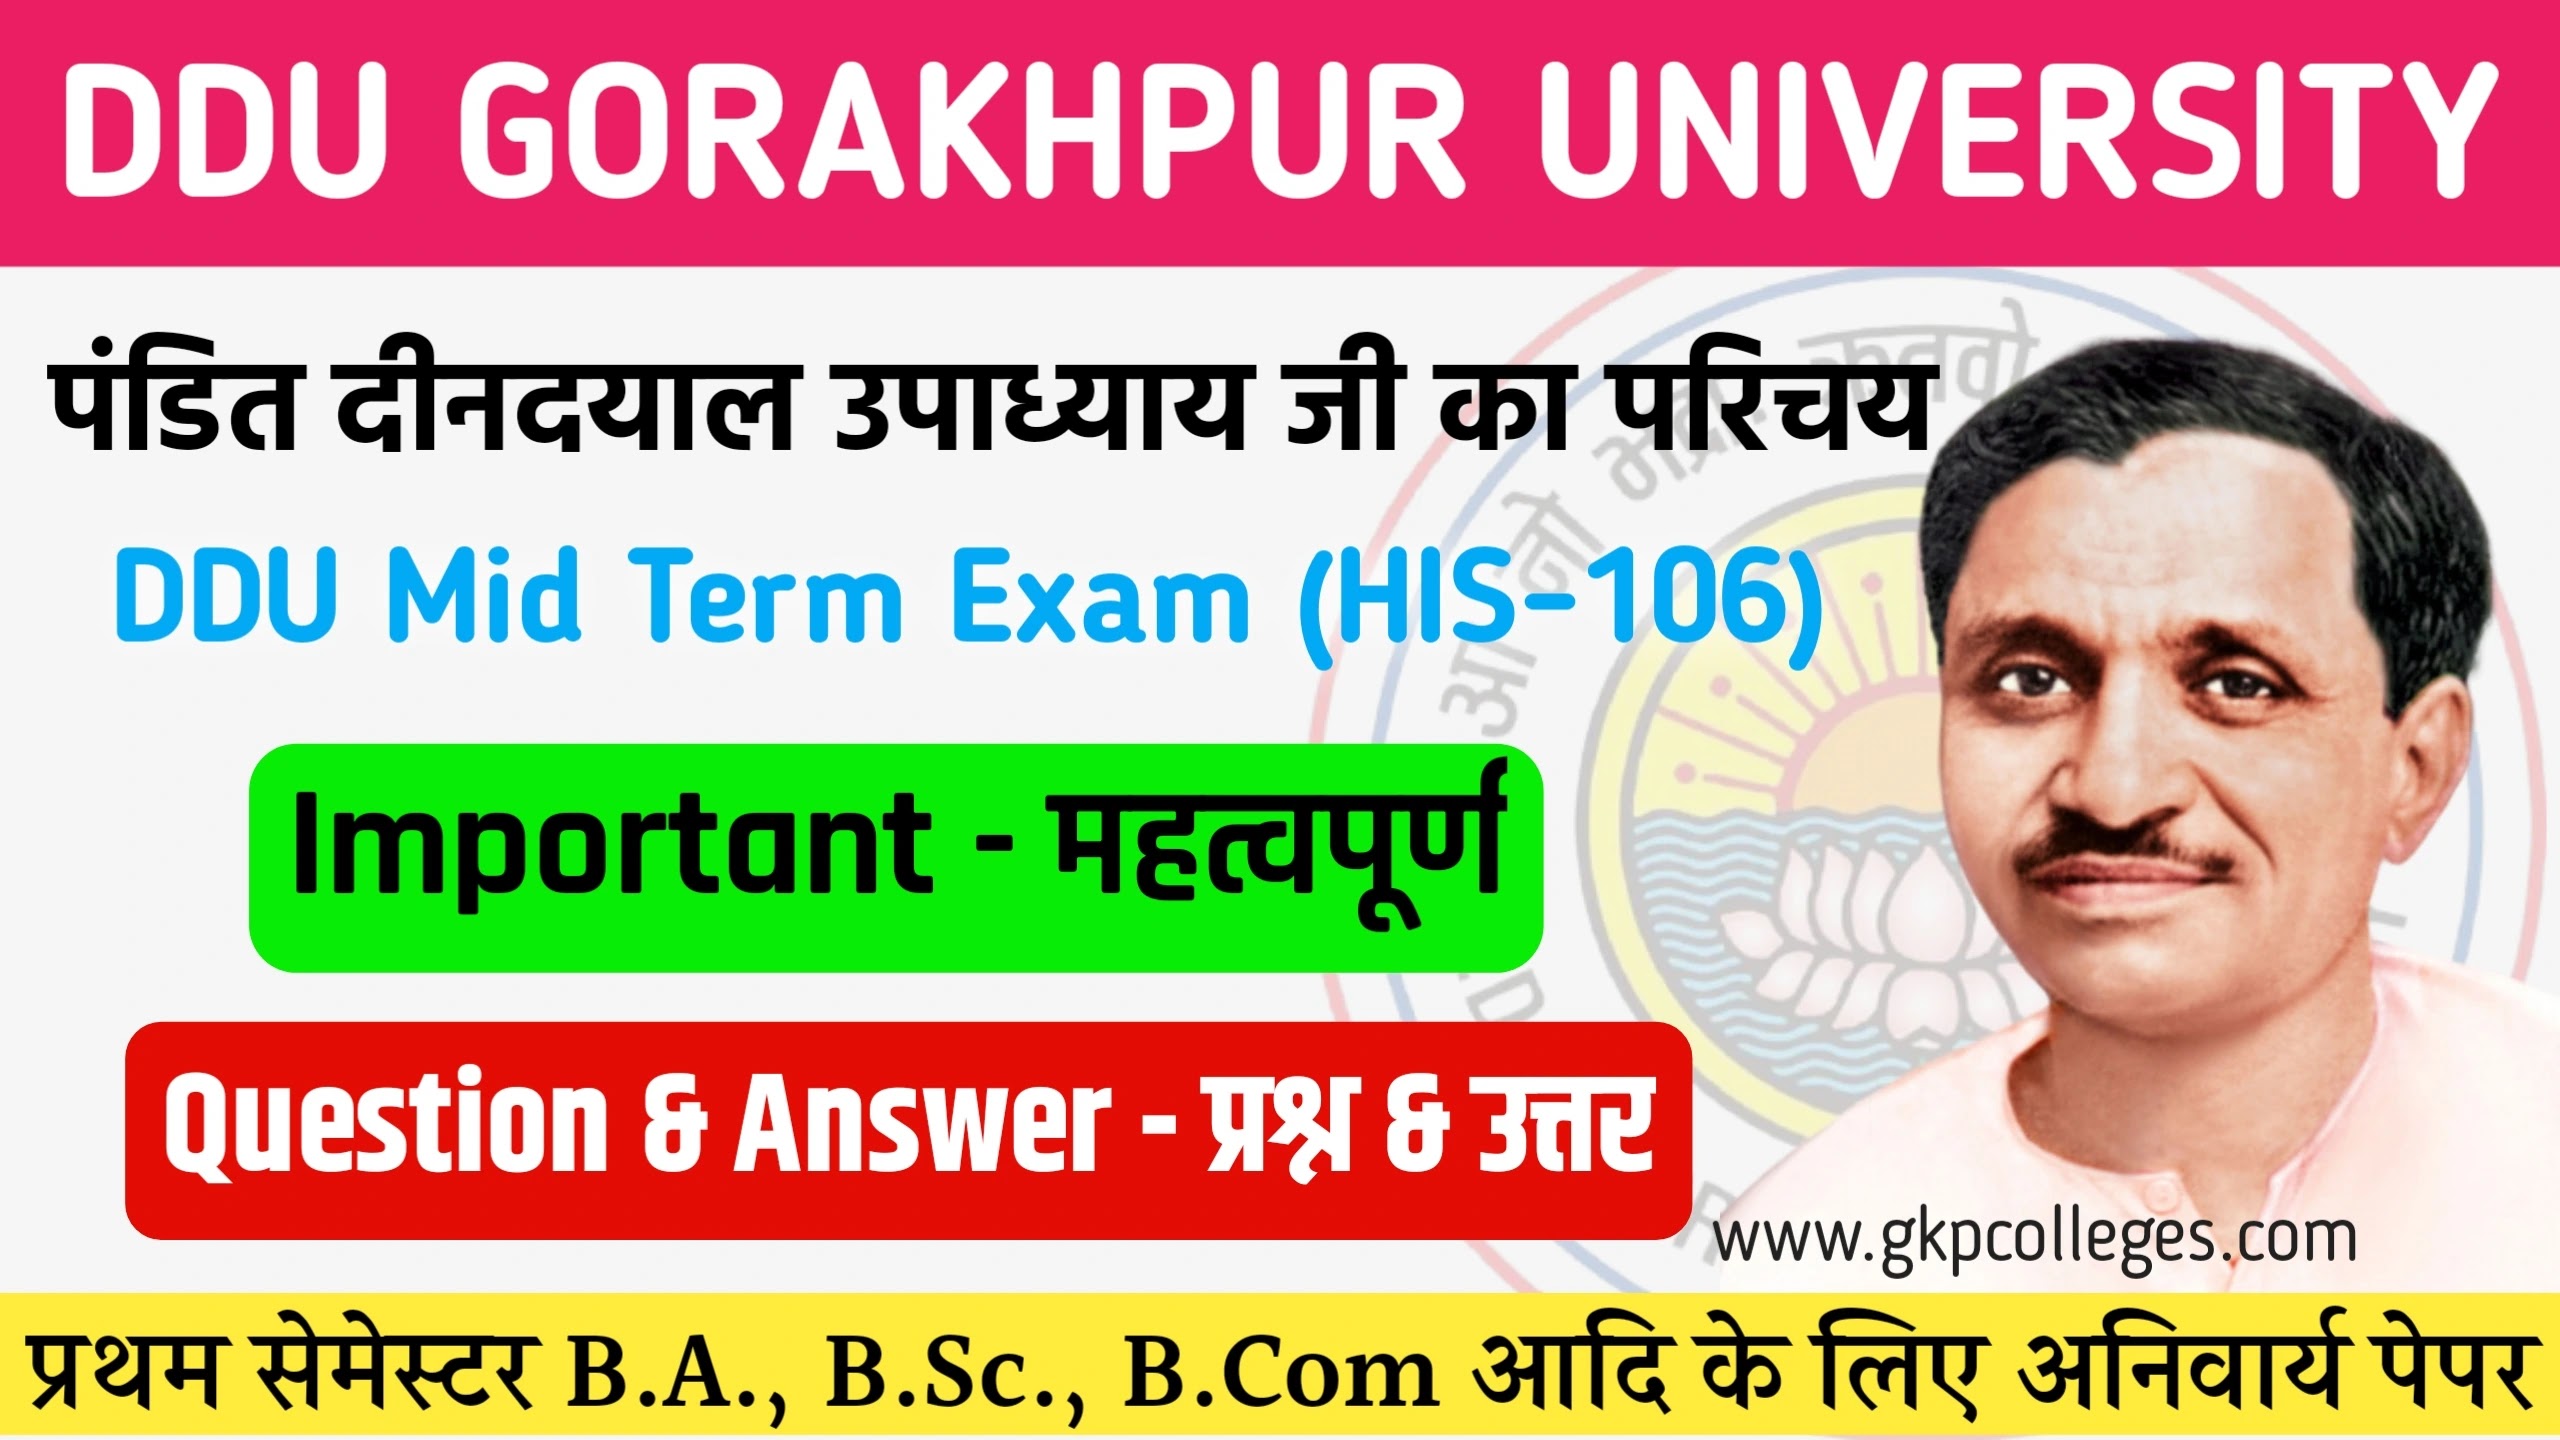 Introduction to Pt. Deen Dayal Upadhyay | Important Questions & Answers | DDU Mid Term Exam |  HIS-106, Minor Subject, Compulsory for all